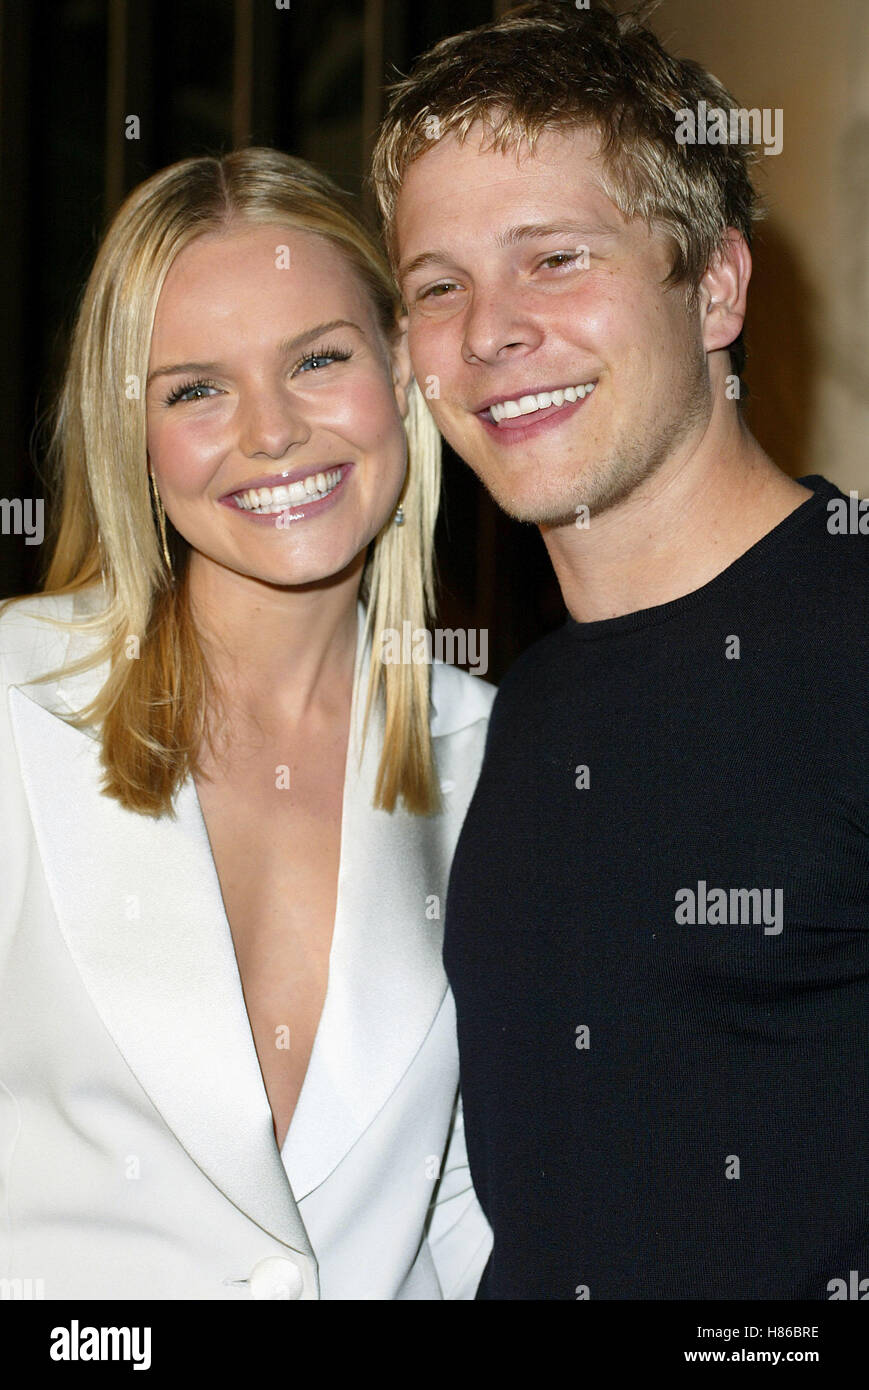 KATE BOSWORTH & MATT CZUCHRY RULES OF ATTRACTION PREMIERE EGYPTIAN THEATRE  HOLLYWOOD LOS ANGELES USA 03 October 2002 Stock Photo - Alamy